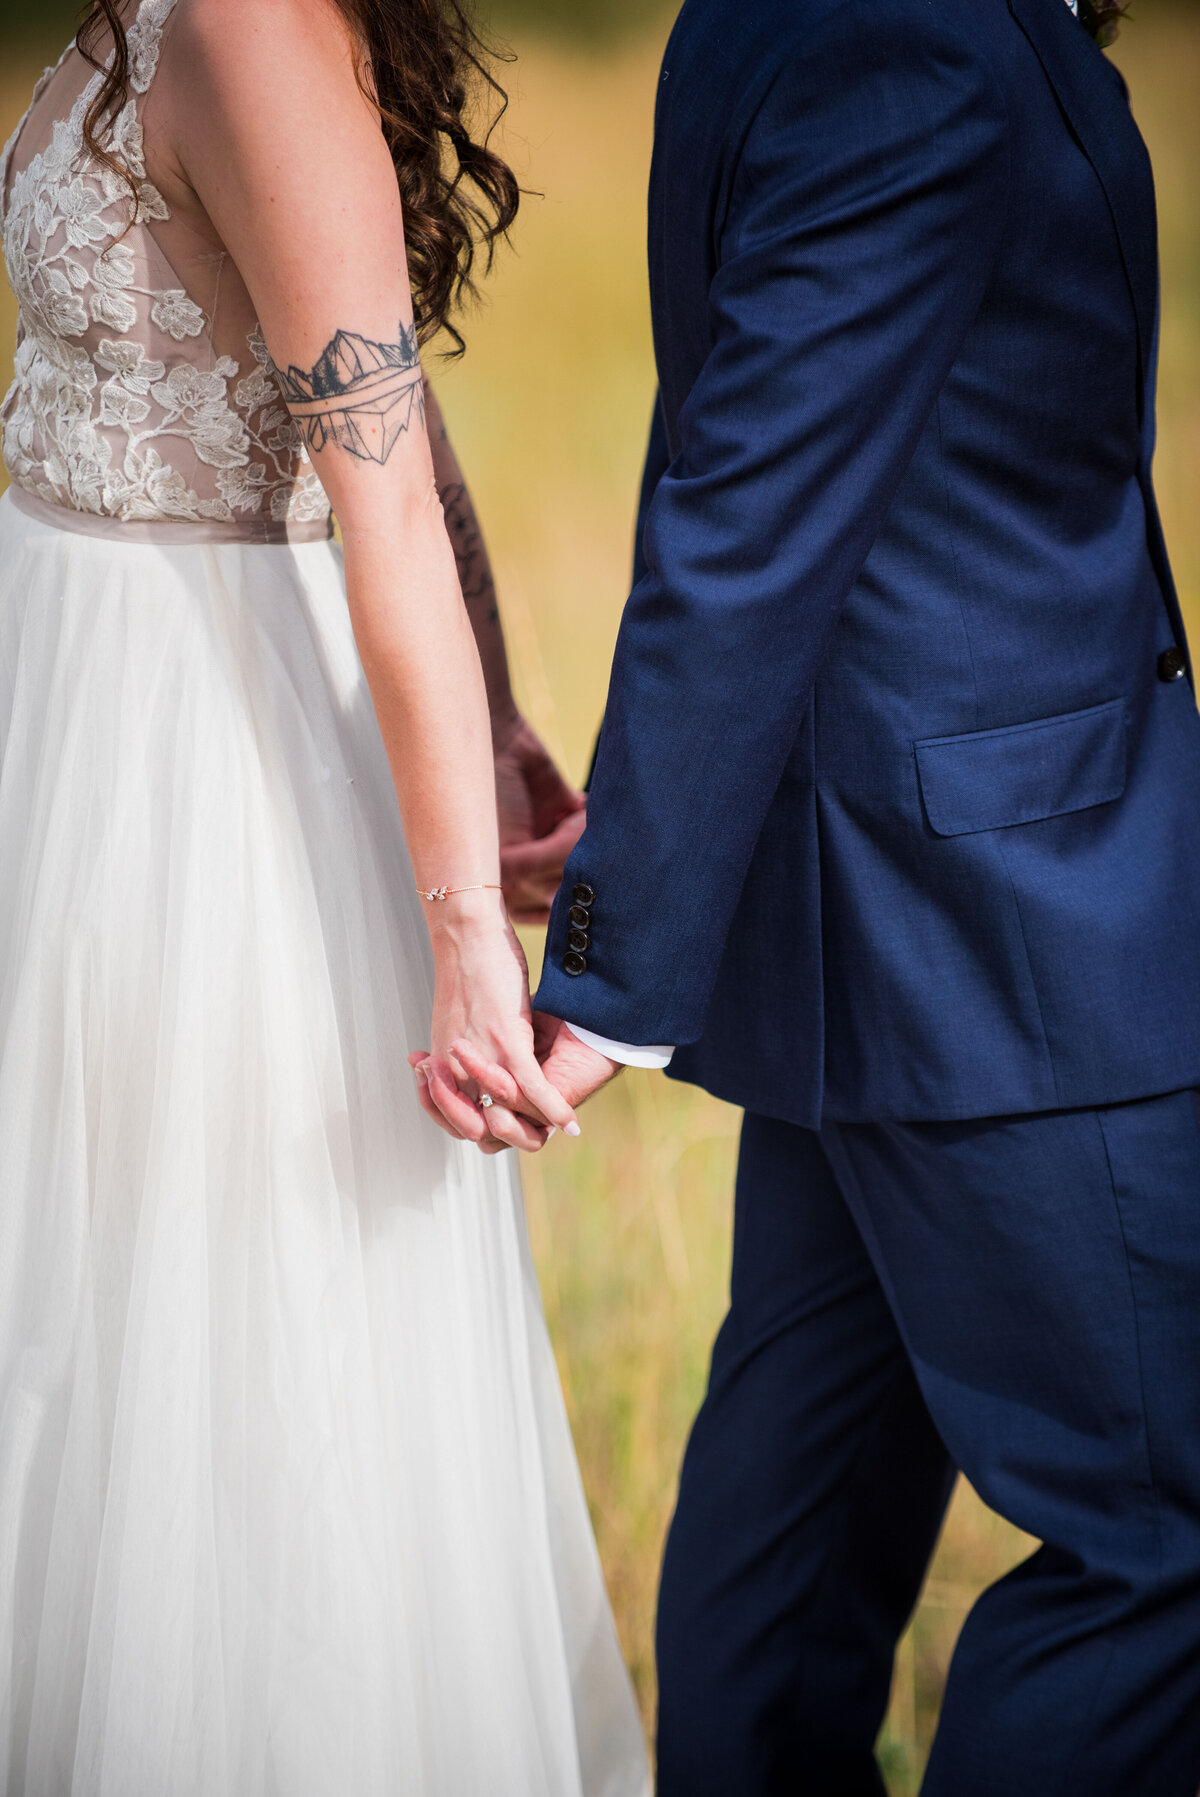 A close up shot of a bride and groom standing back to back holding hands.